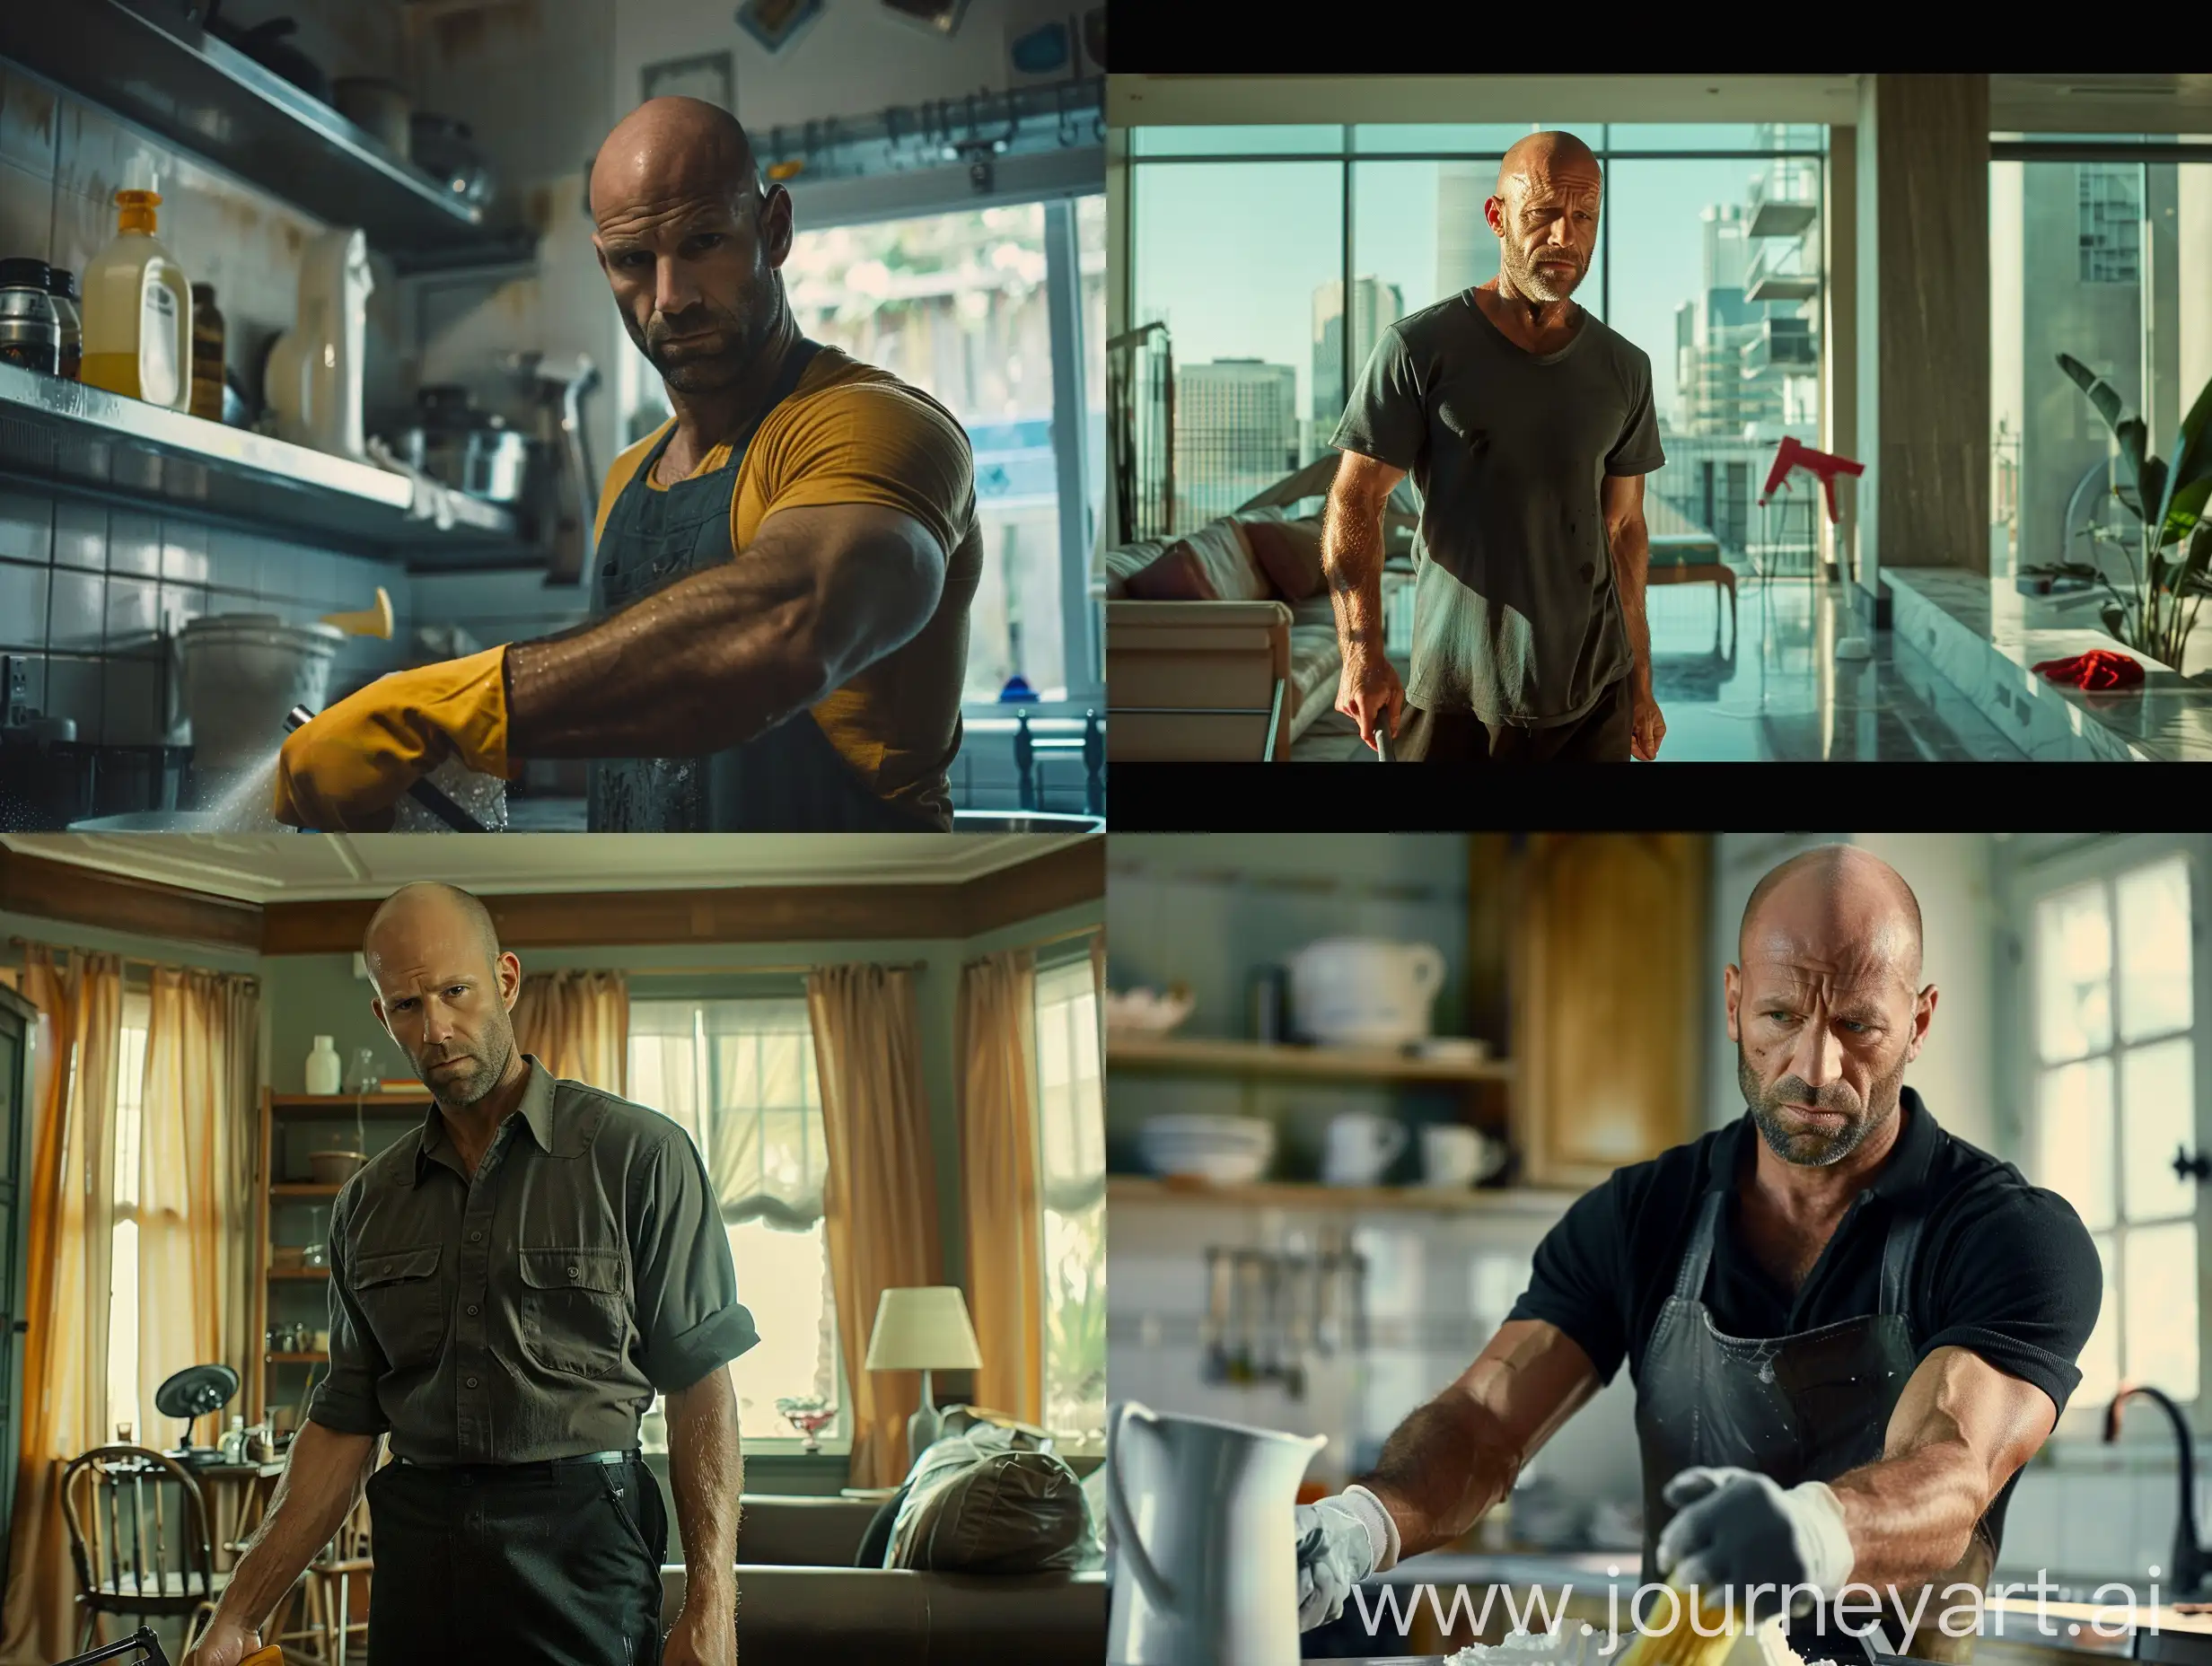 Jason-Statham-Cleaning-Apartment-in-Professional-Uniform